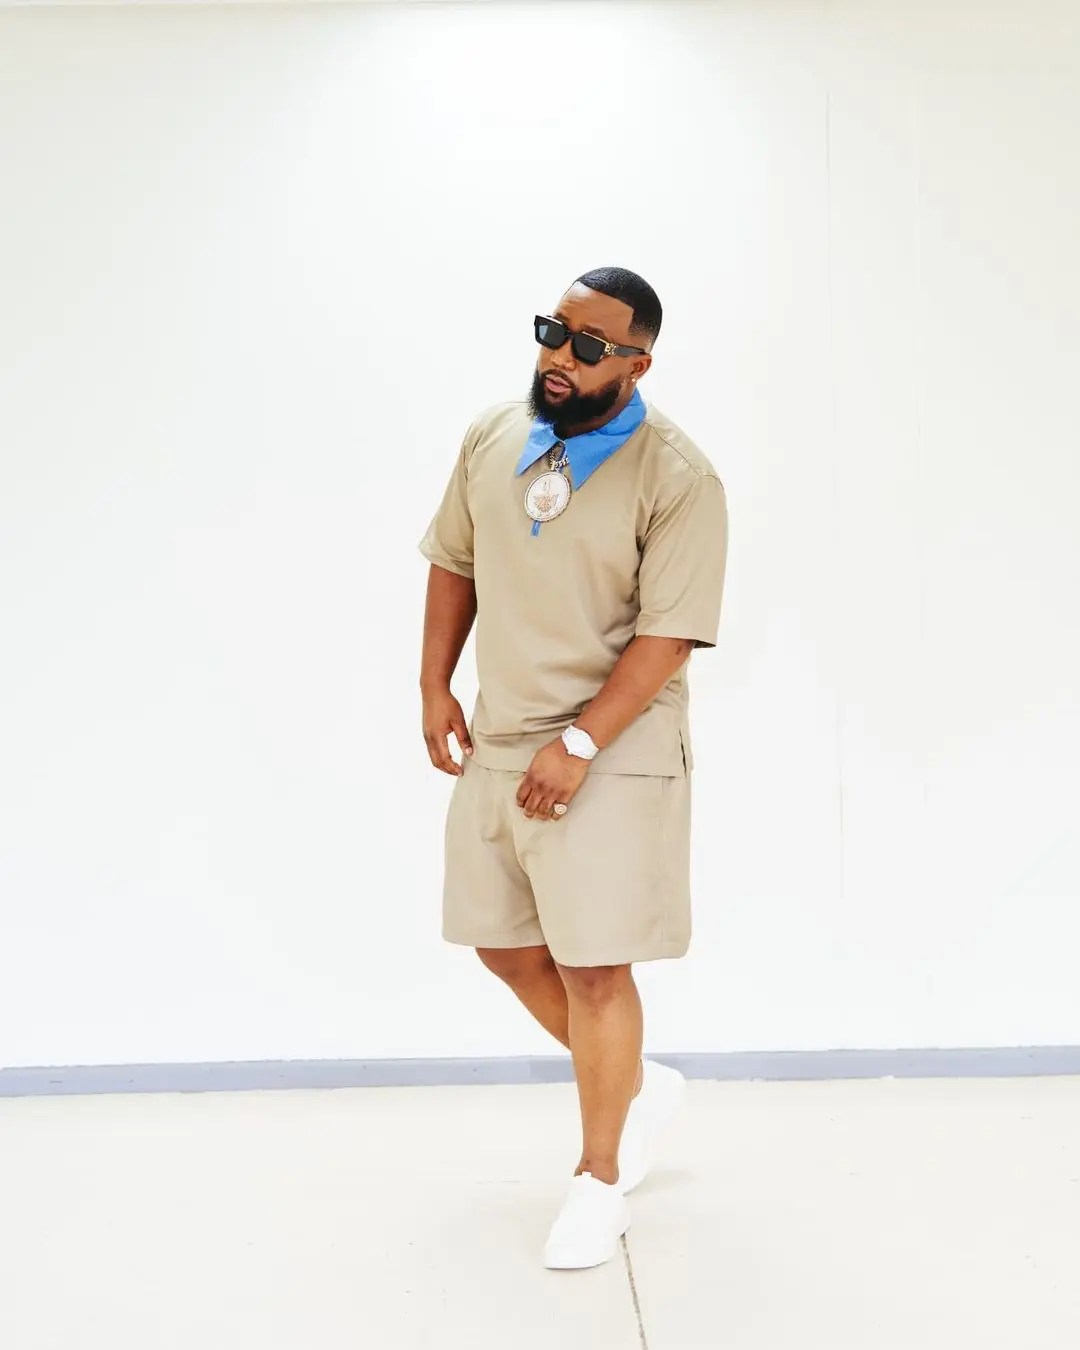 Cassper Nyovest leaves Fans with chest pains after posting Ferrari – PHOTO